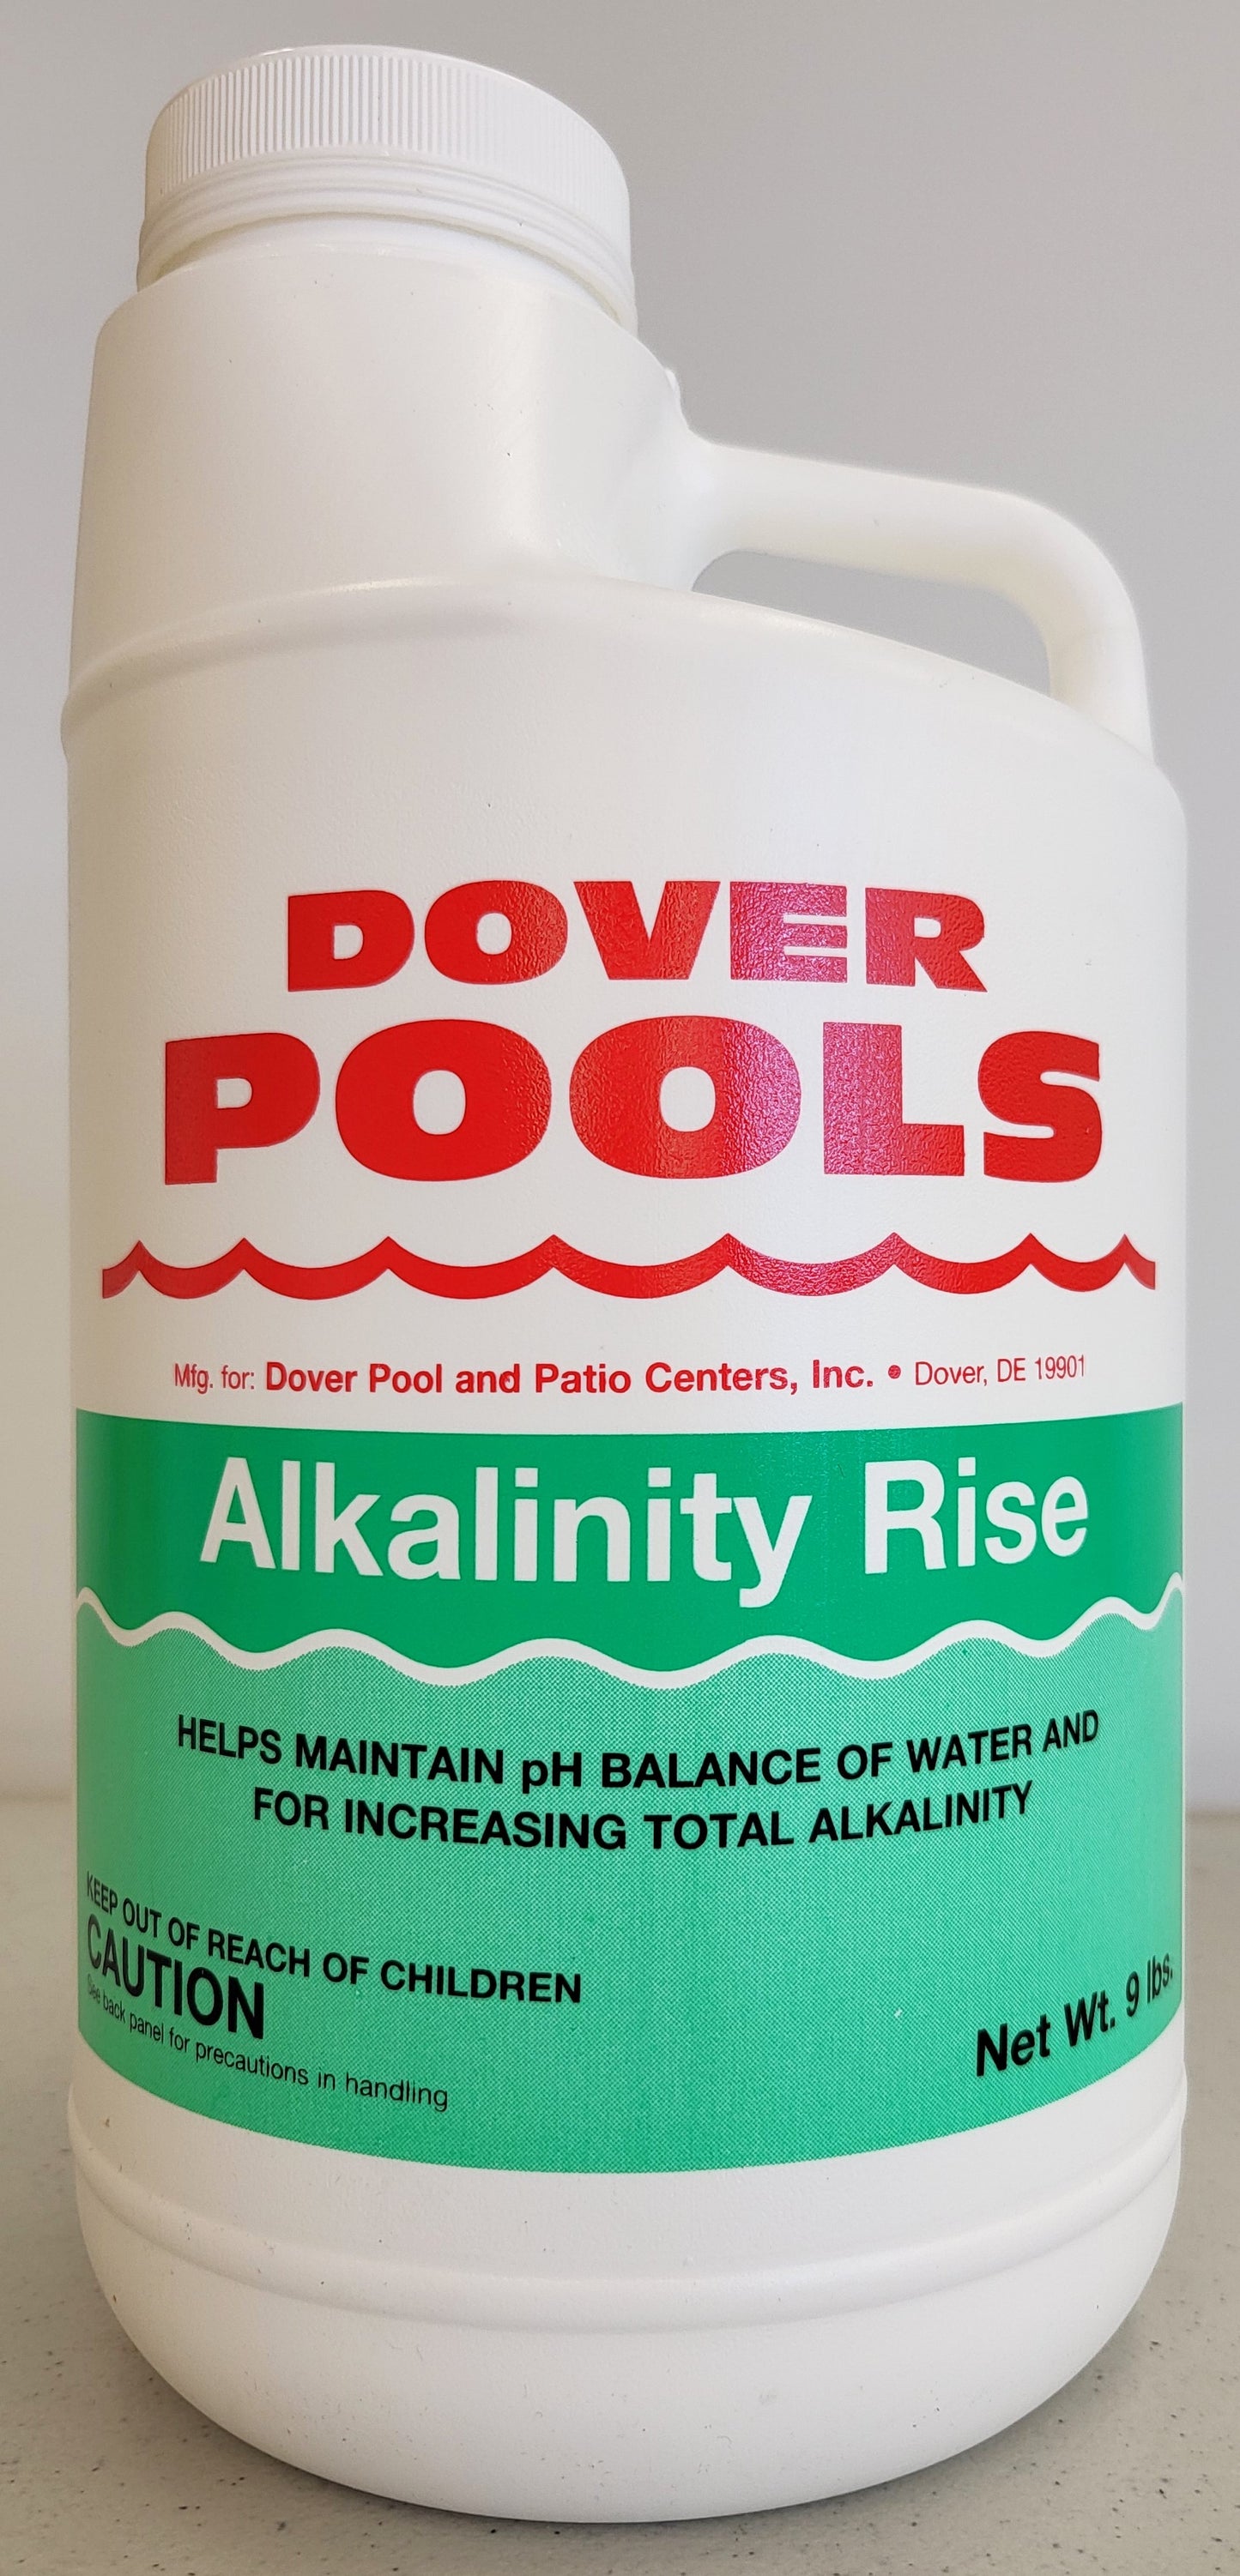 DOVER POOLS ALKALINITY RISE